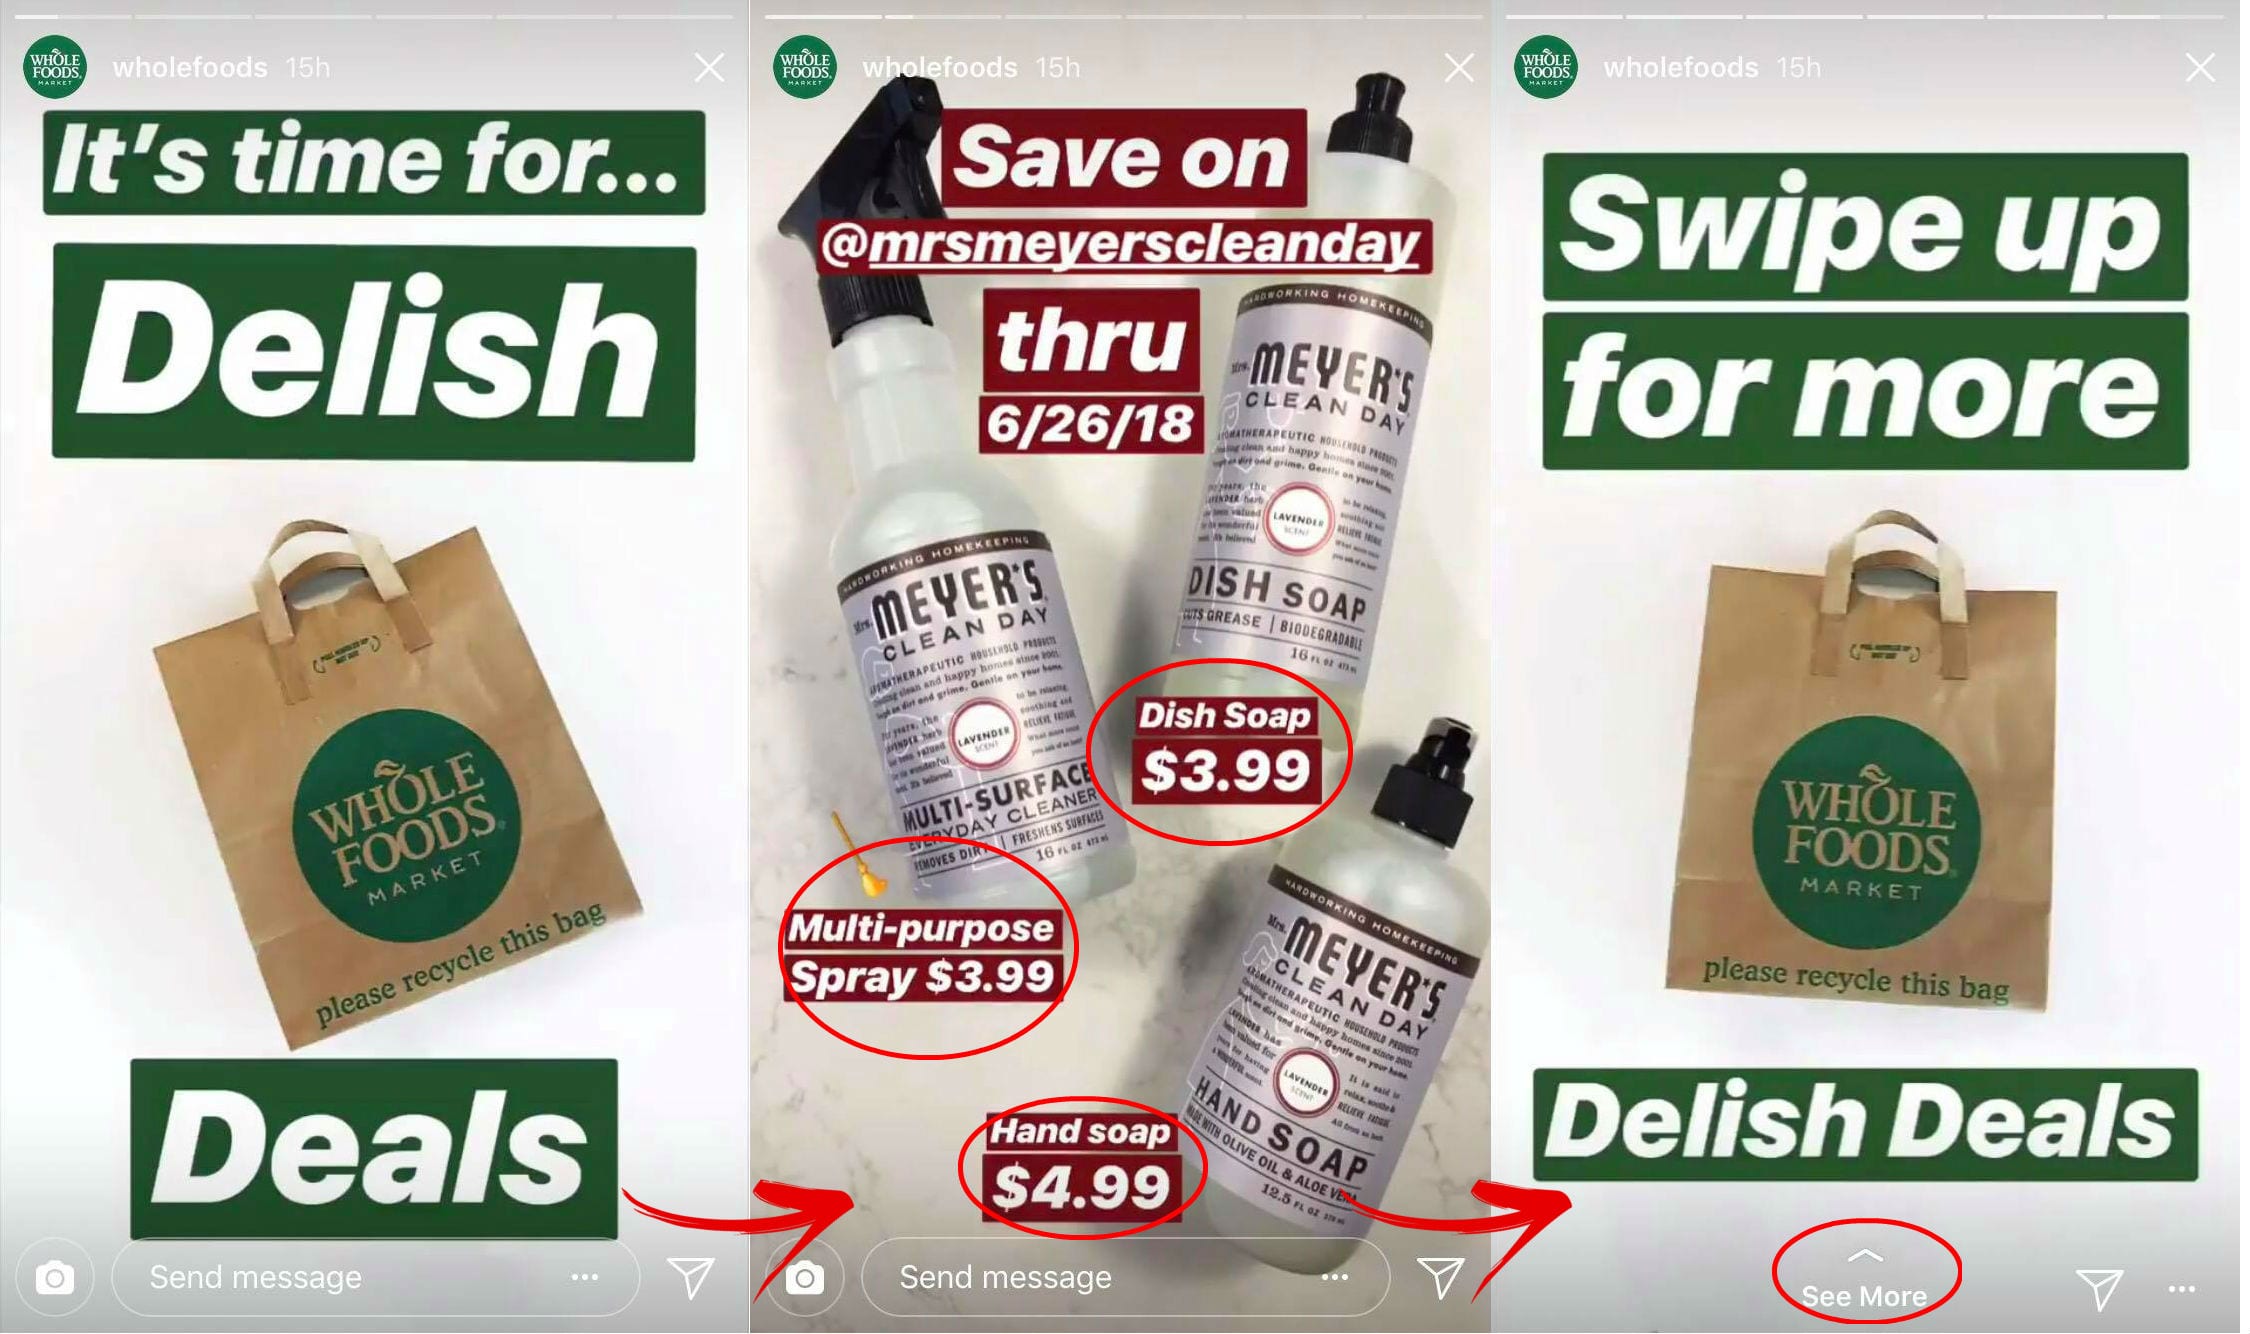 deals wholefoods - Cracking Instagram's Code with Ephemeral Content